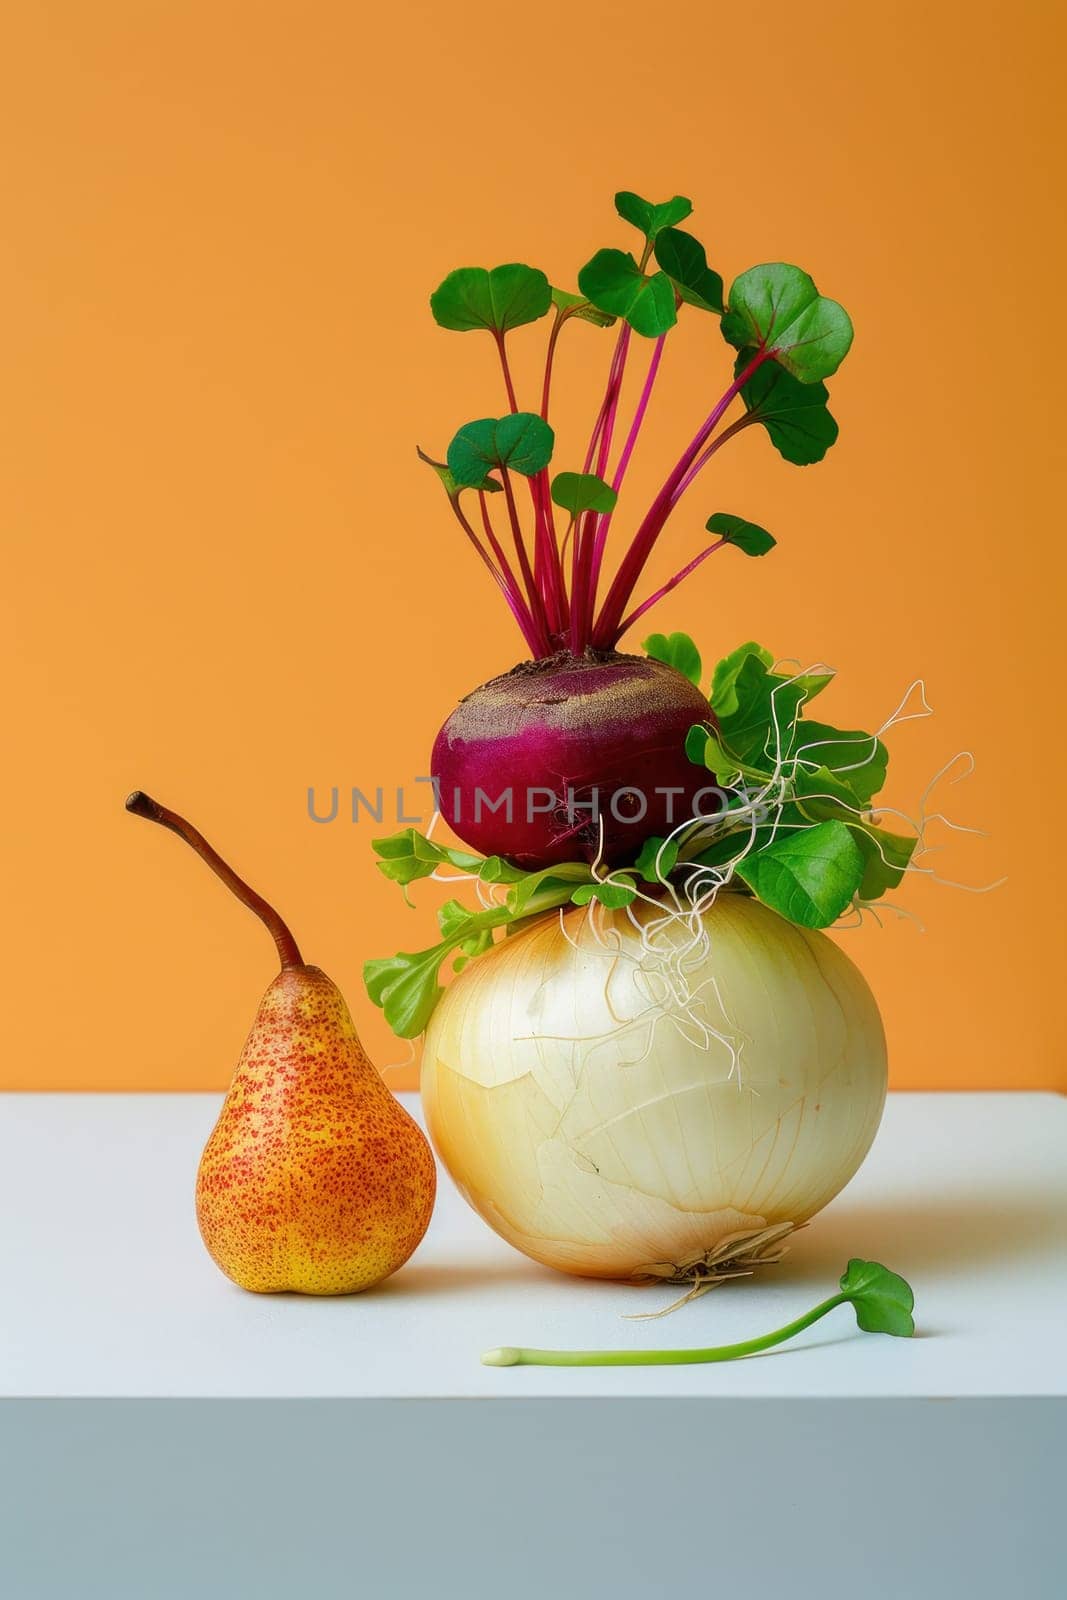 Colorful beetroot harvest for healthy cooking and vibrant cuisine with fresh organic produce concept